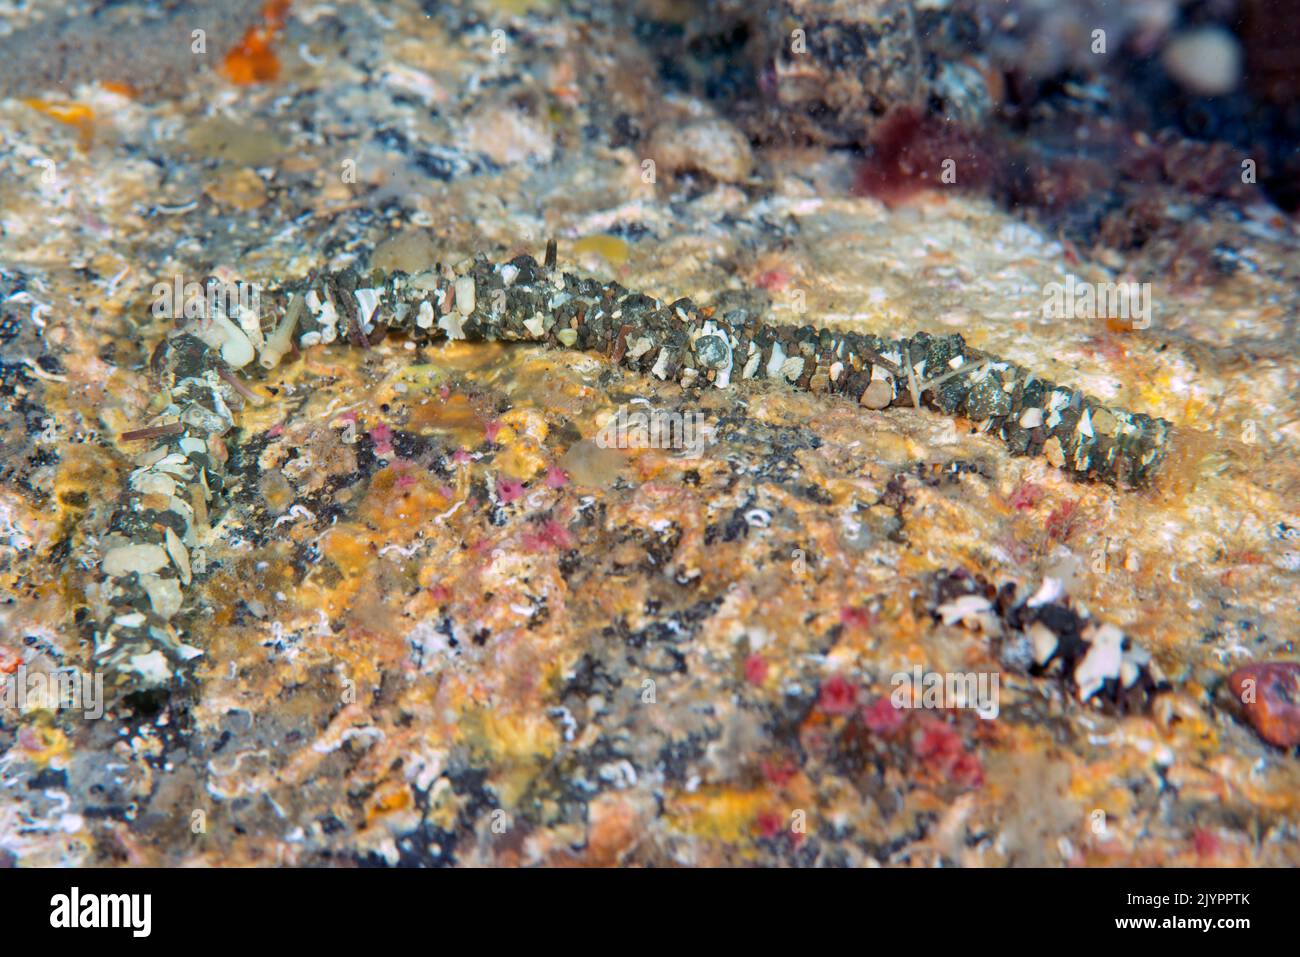 Worm (Eupolymnia nebulosa). Polychaete of about 15 cm that has the body covered with pebbles and fragments of shells that it adheres itself through a mucosa in order to protect itself. The most common is to find it under stones. Invertebrates of the Canary Islands, Tenerife. Stock Photo